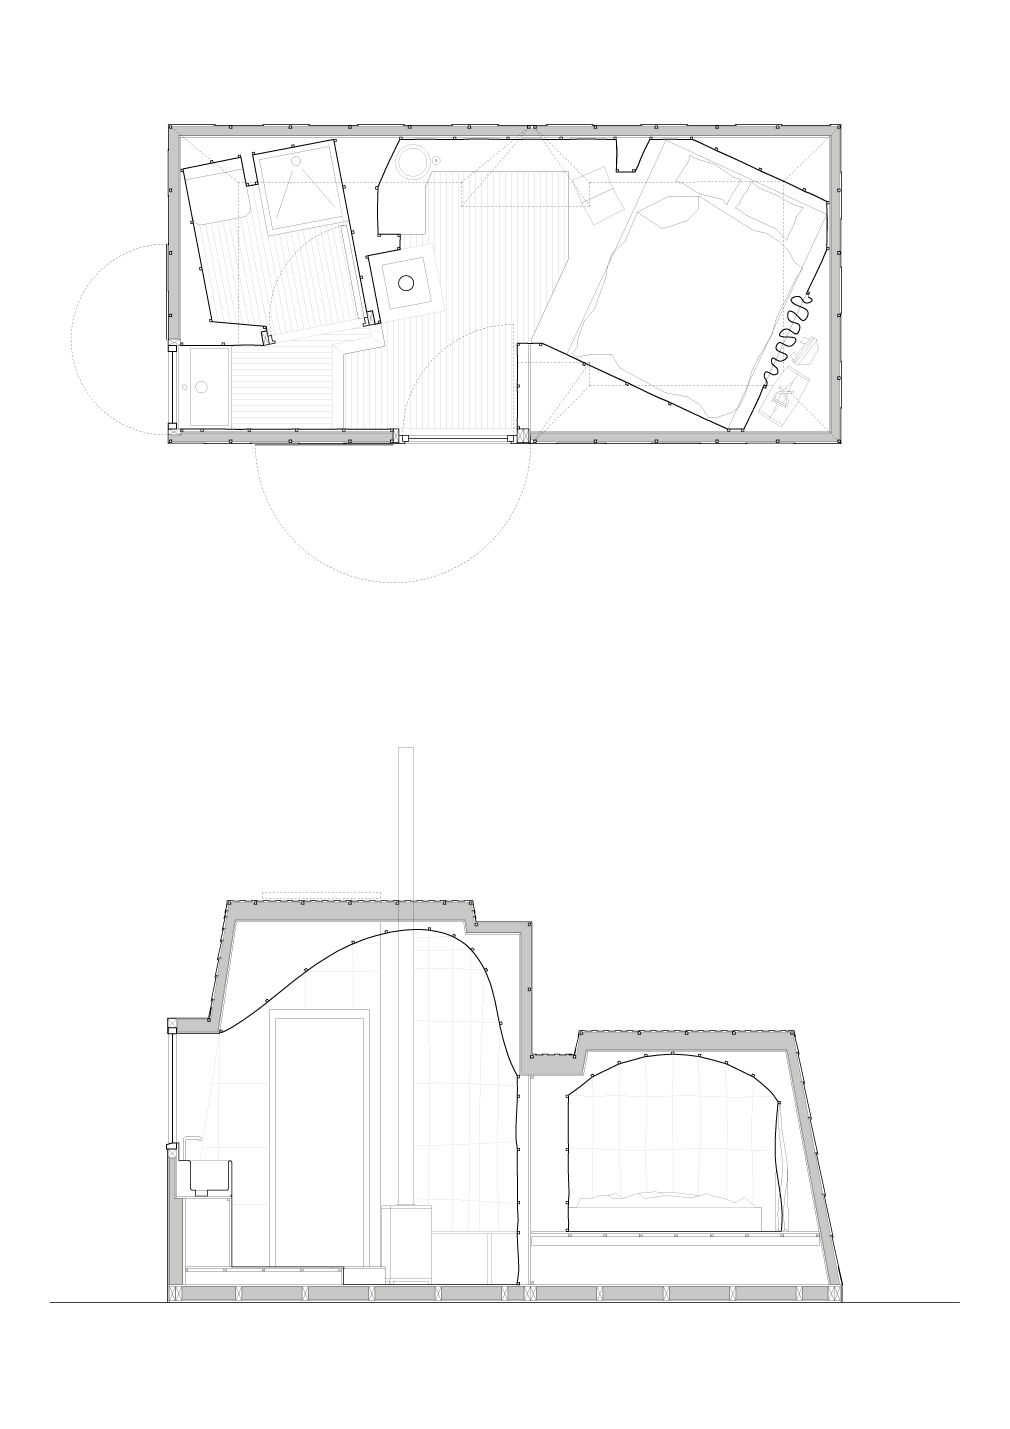 Drawn orthographic plan and section of the proposal.